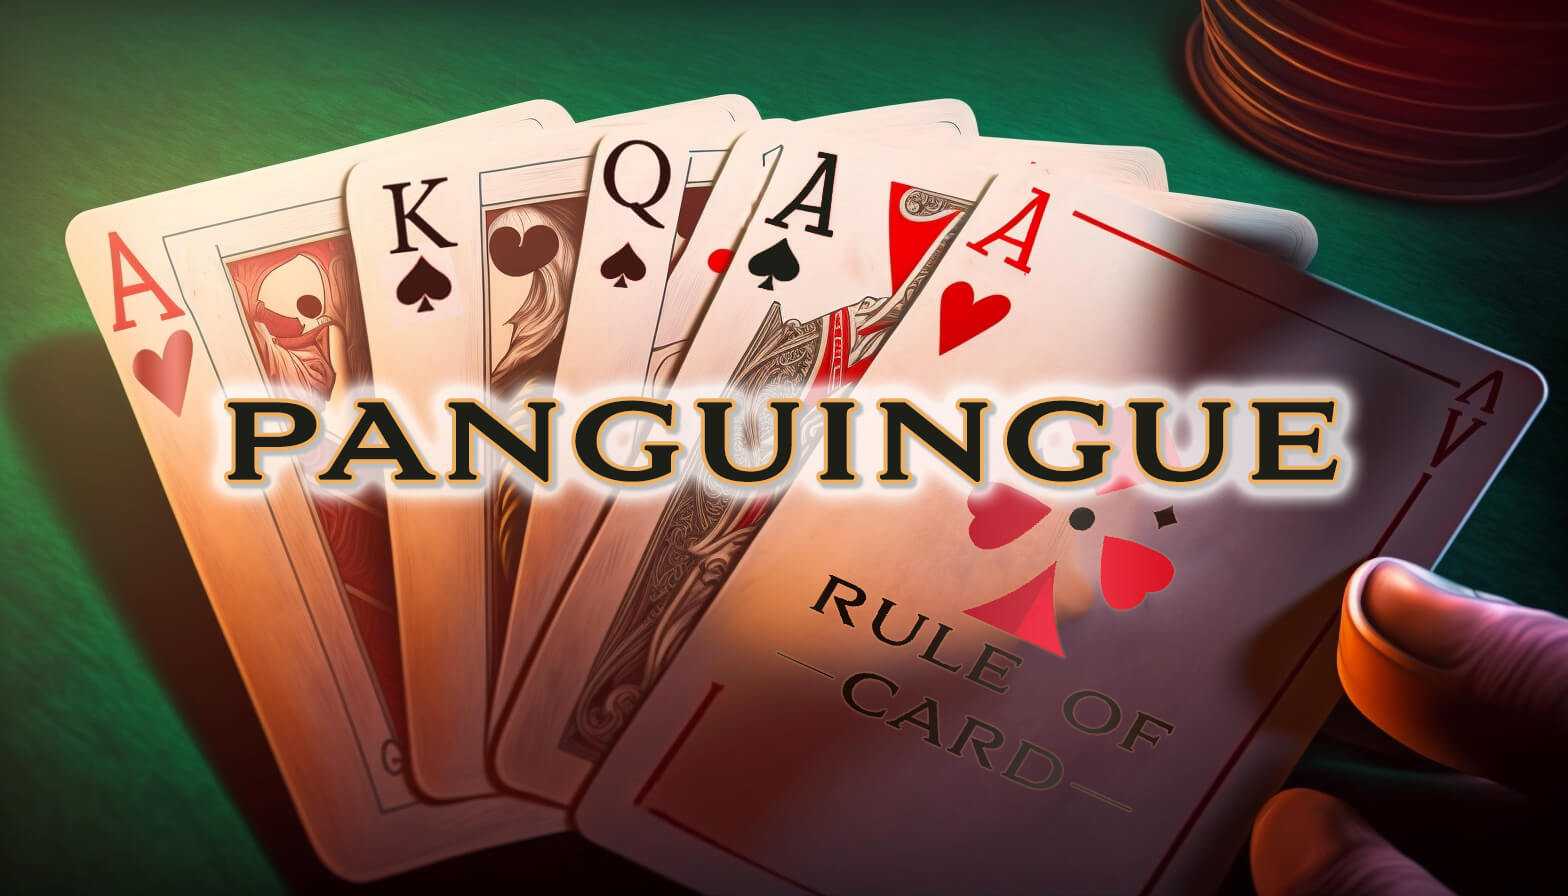 Playing the card game Panguingue